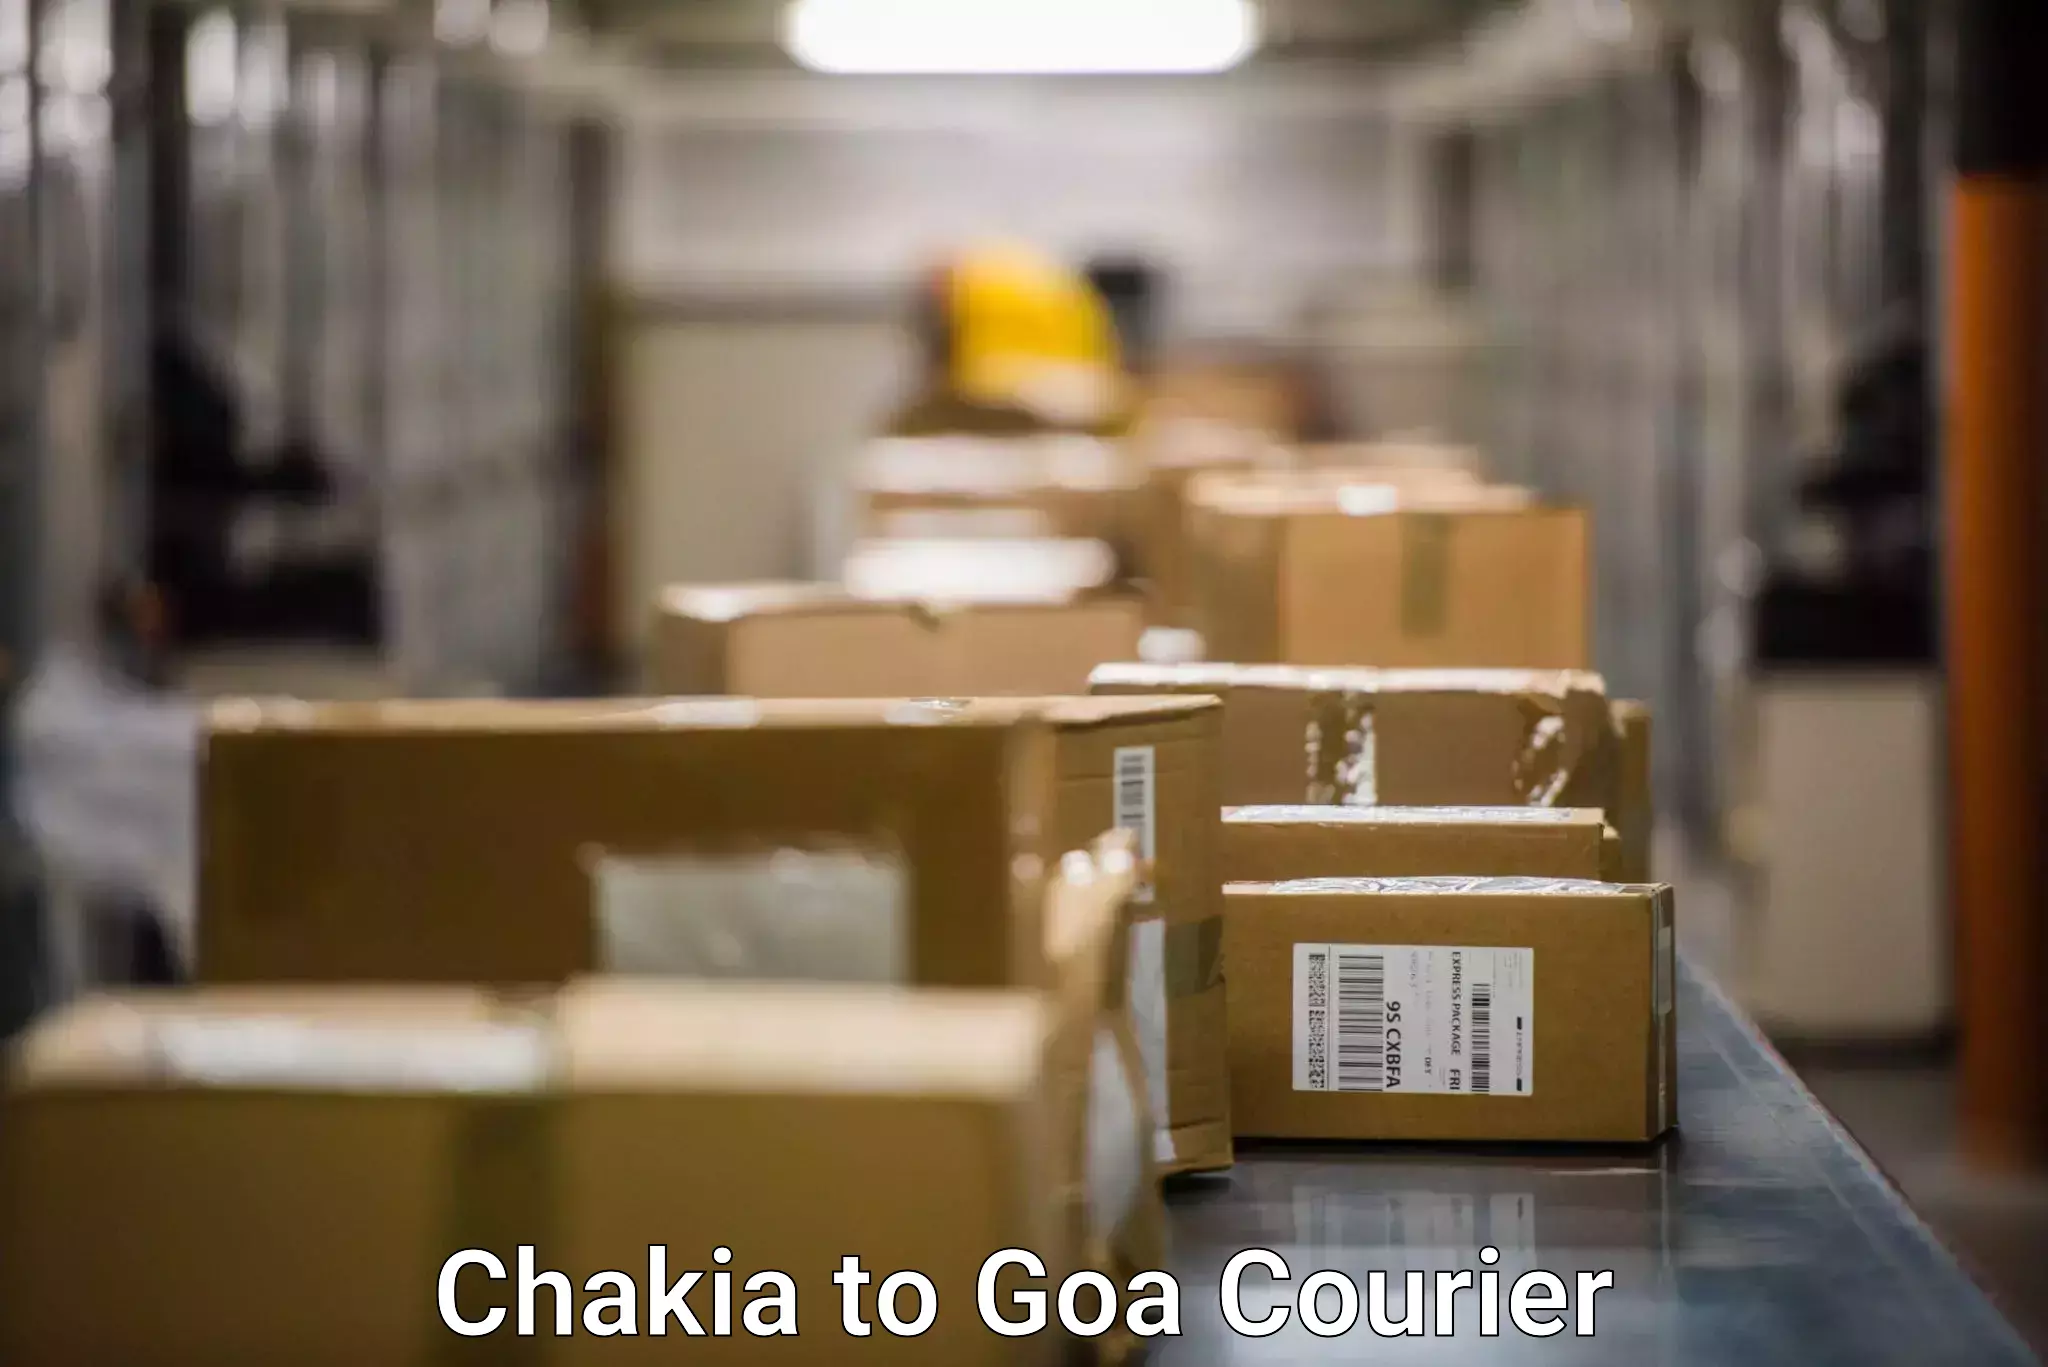 Express delivery network Chakia to Goa